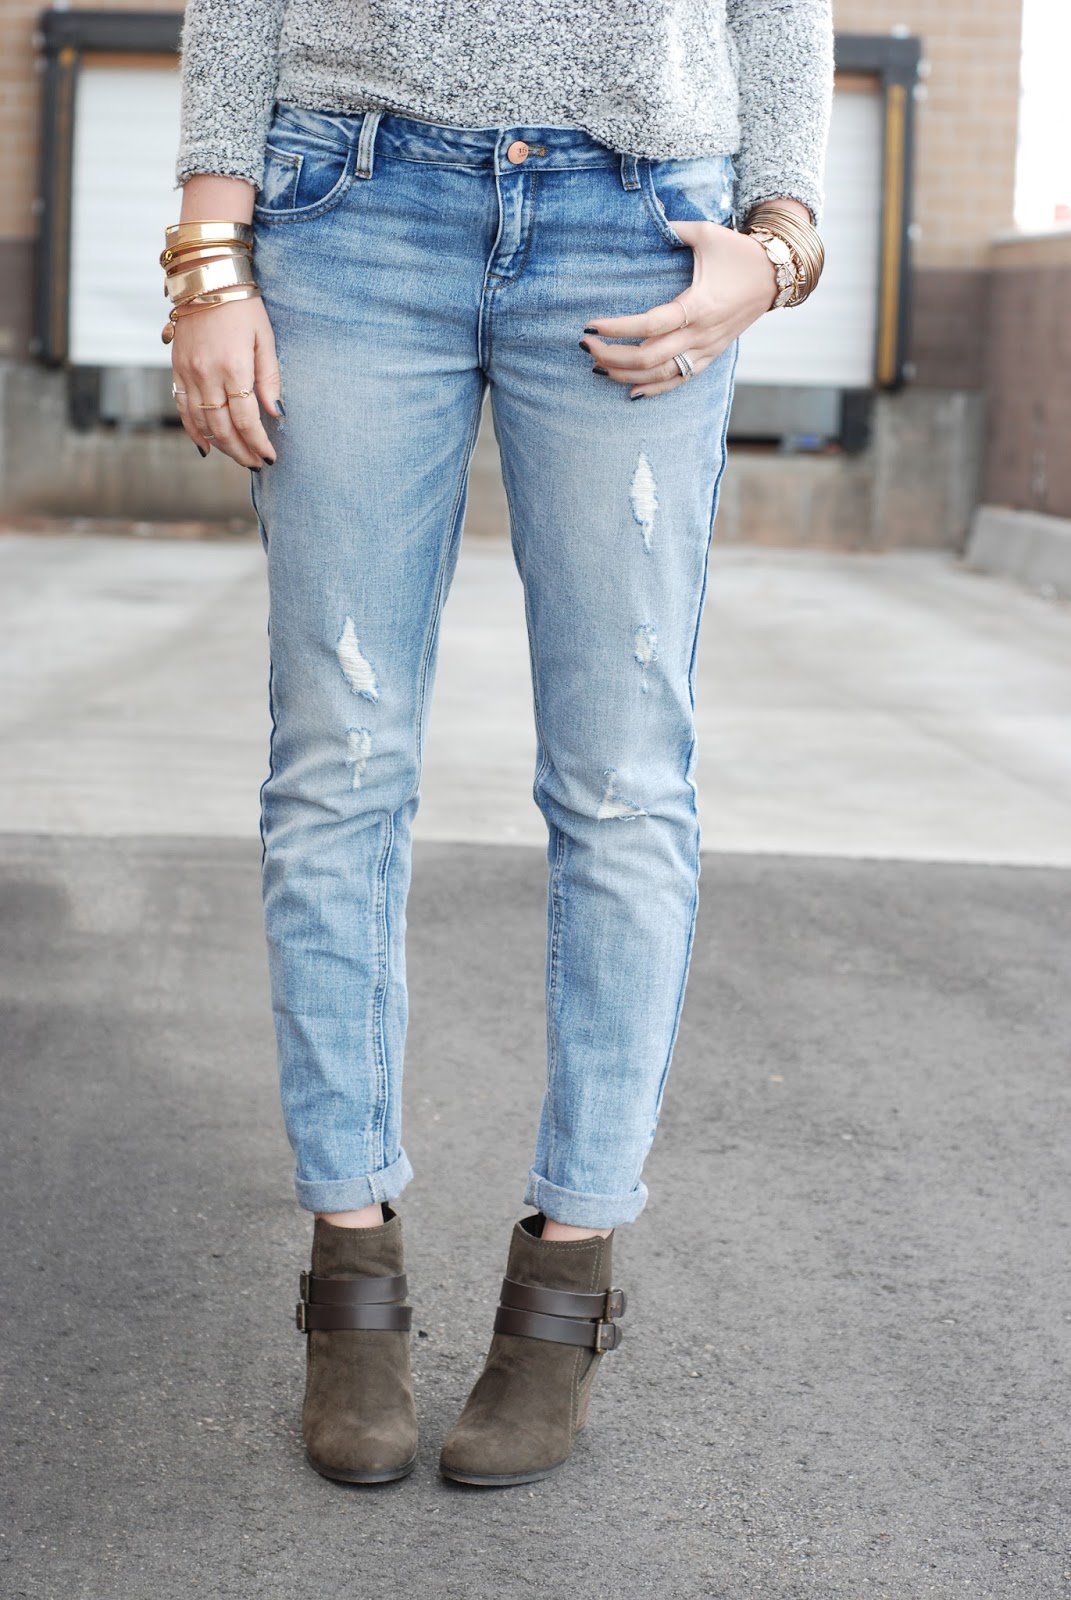 MY BOYFRIEND JEANS FEATURING CLAD & CLOTH | The Red Closet Diary